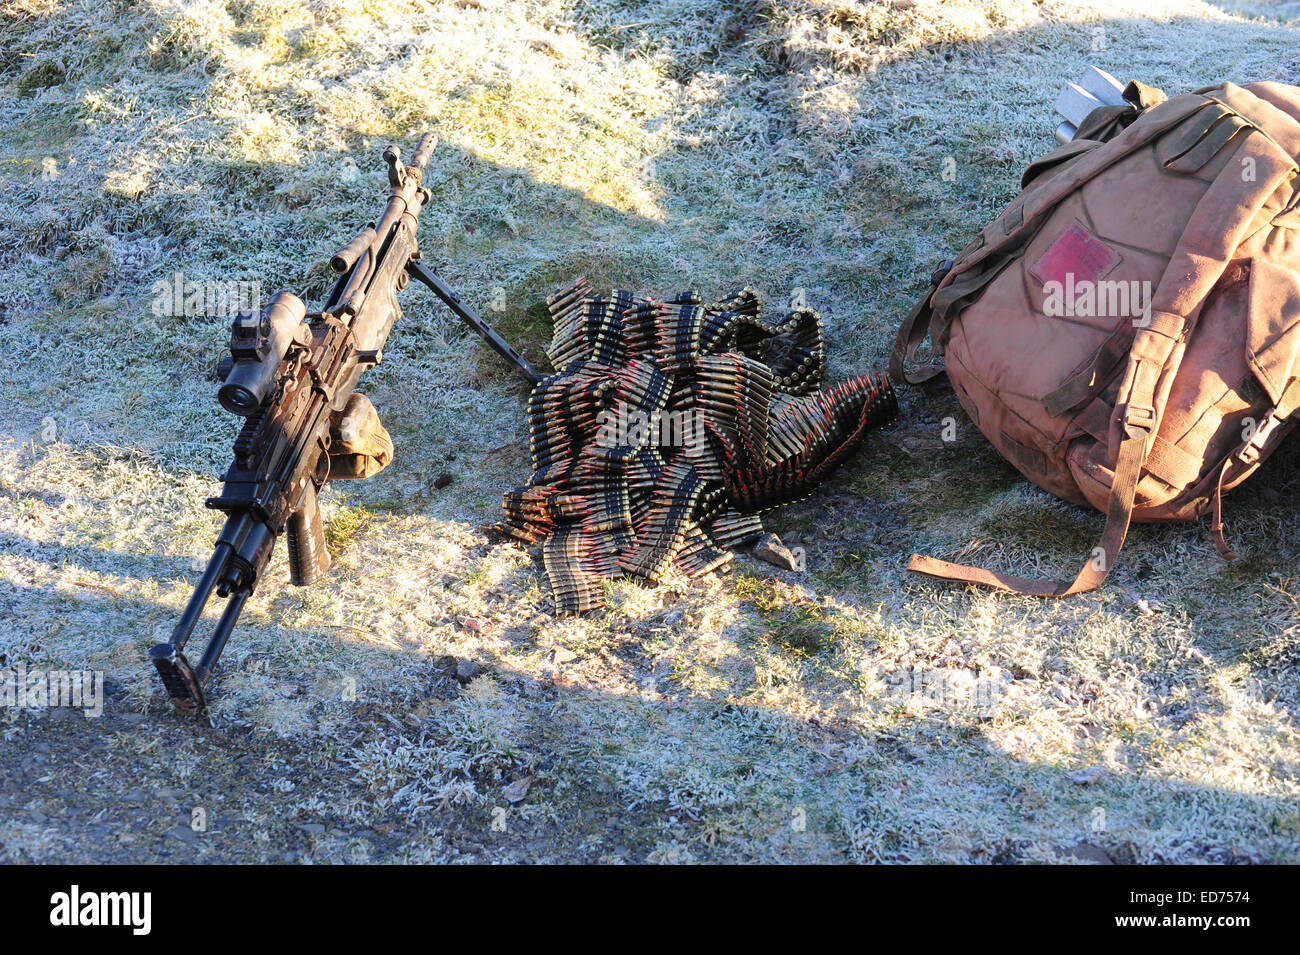 A 5.62mm Minimi light machine gun with ammunitions by its side. Stock Photo